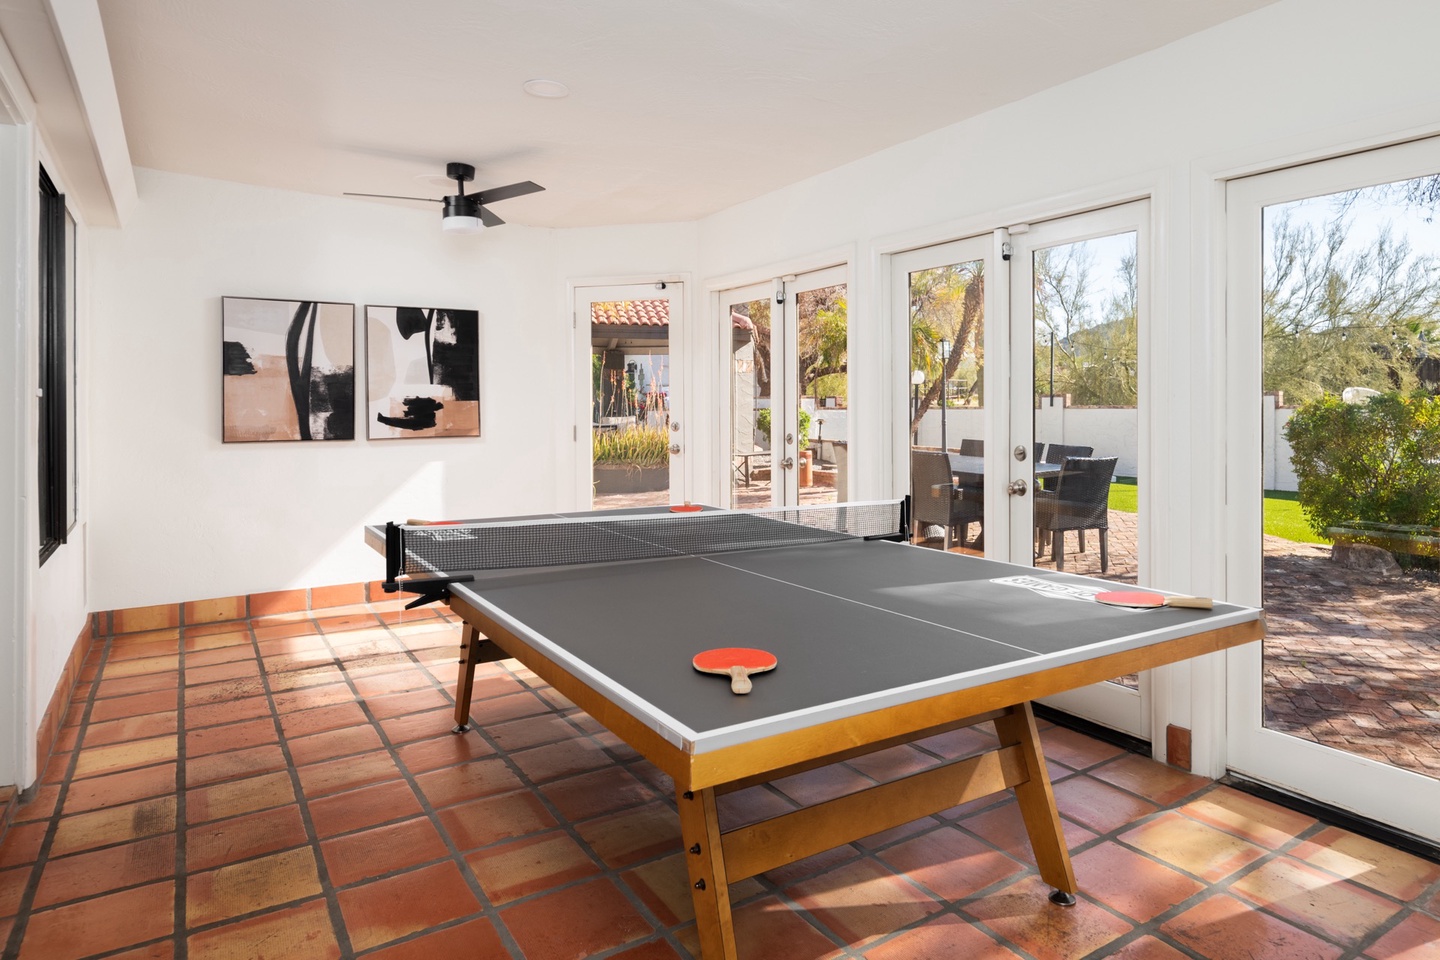 Challenge your friend in ping pong